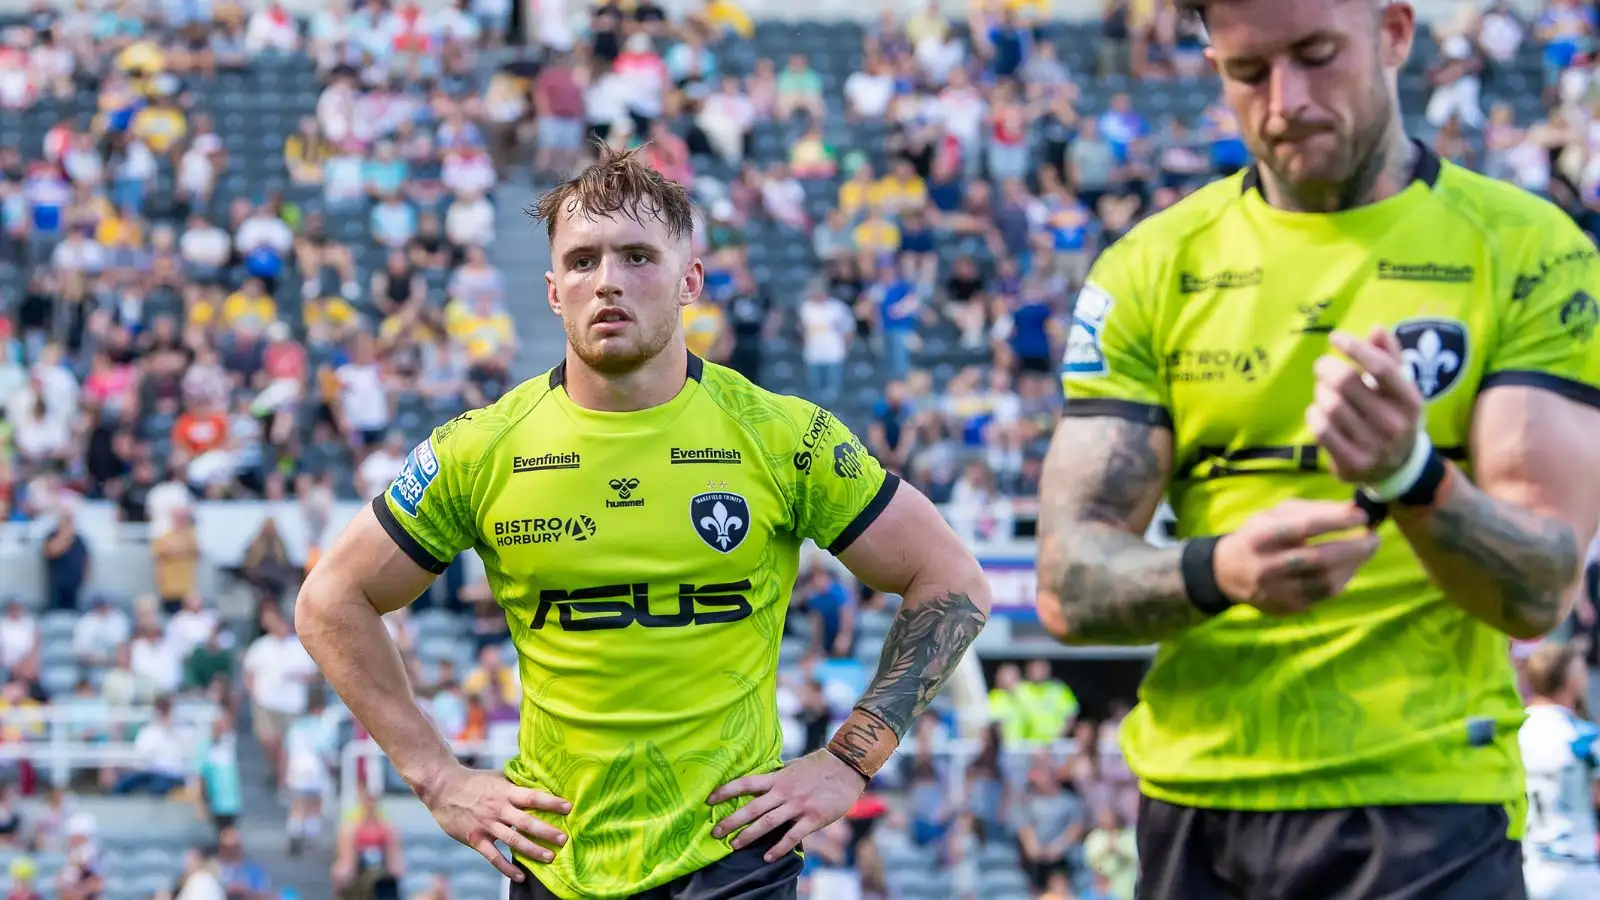 Super League return confirmed for Jack Croft with contract issues resolved